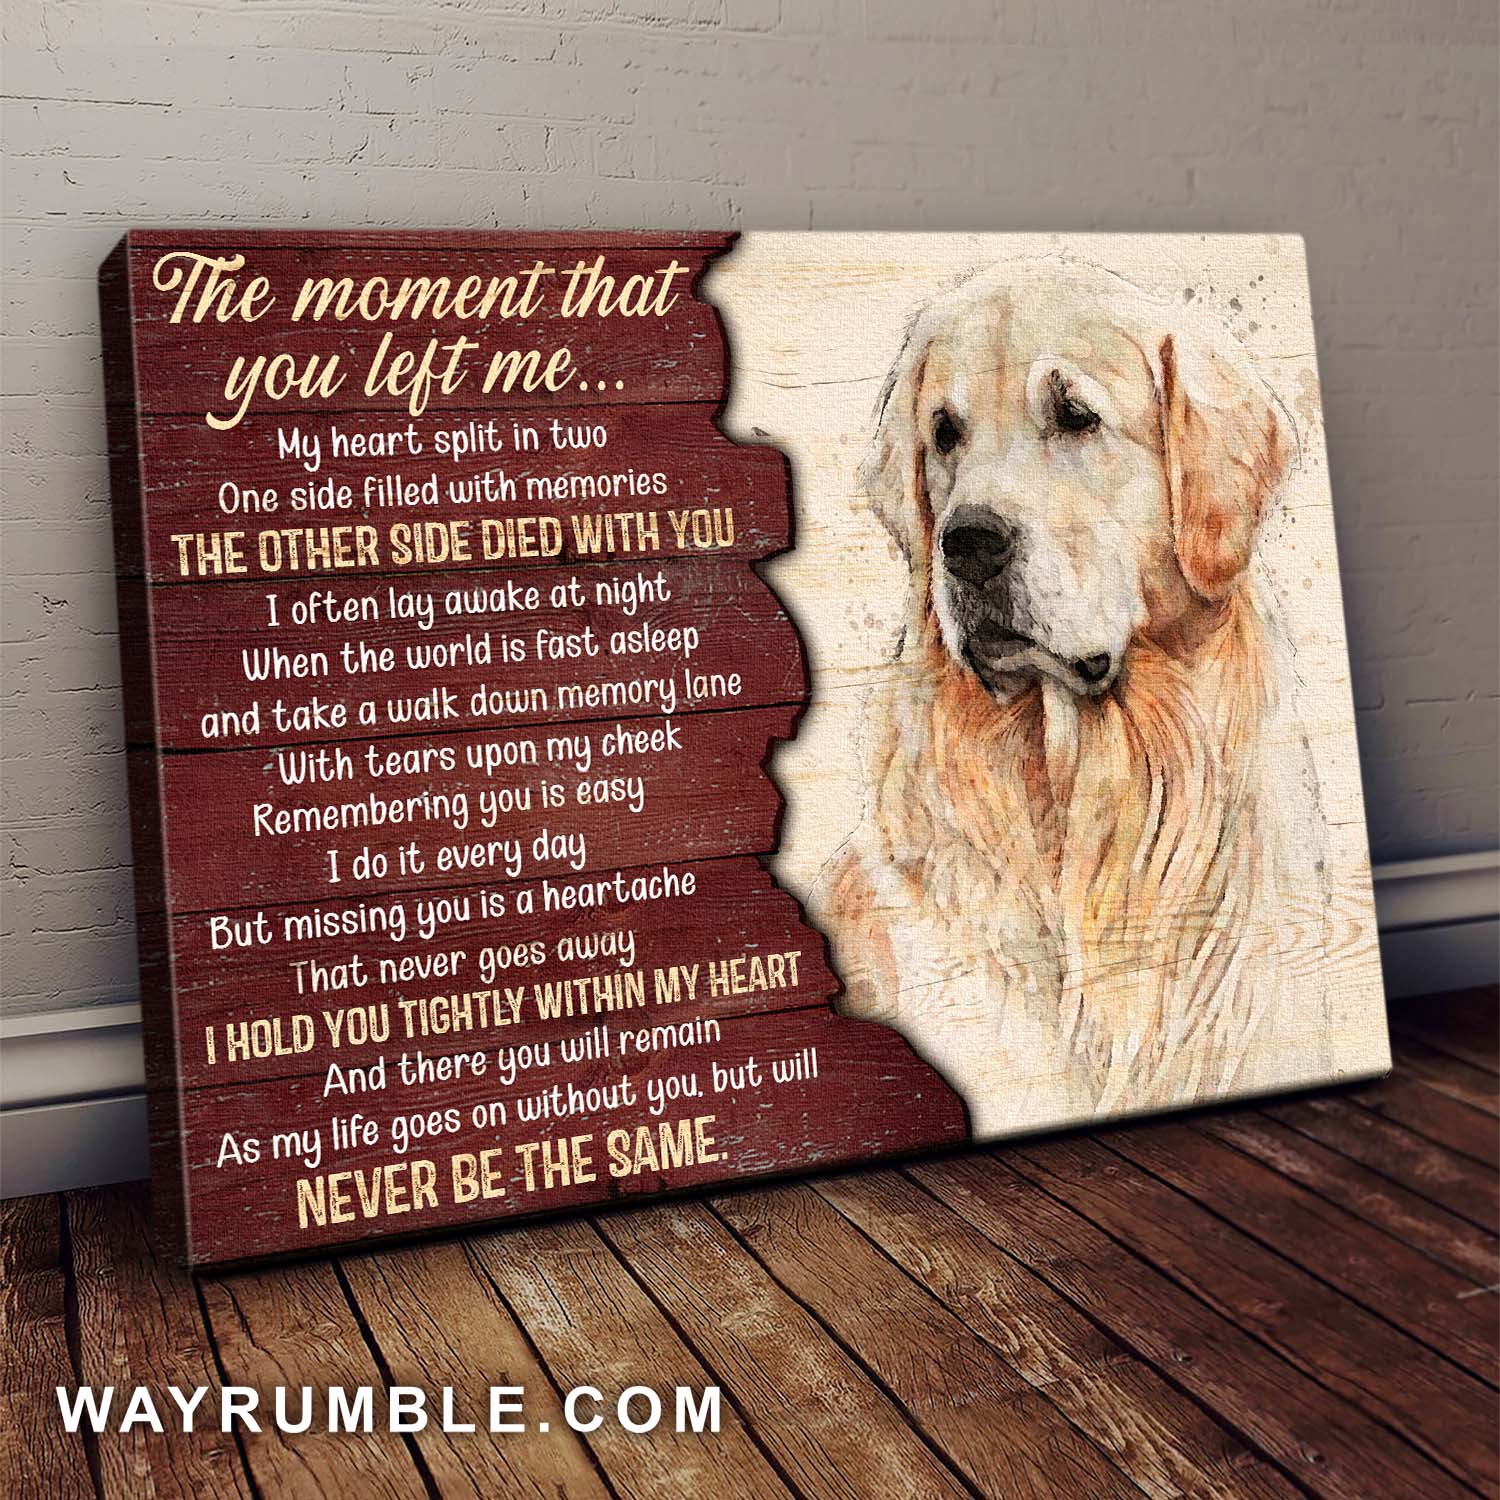 Golden retriever, The moment that you left me, my life is never the same - Dog Landscape Canvas Prints, Wall Art